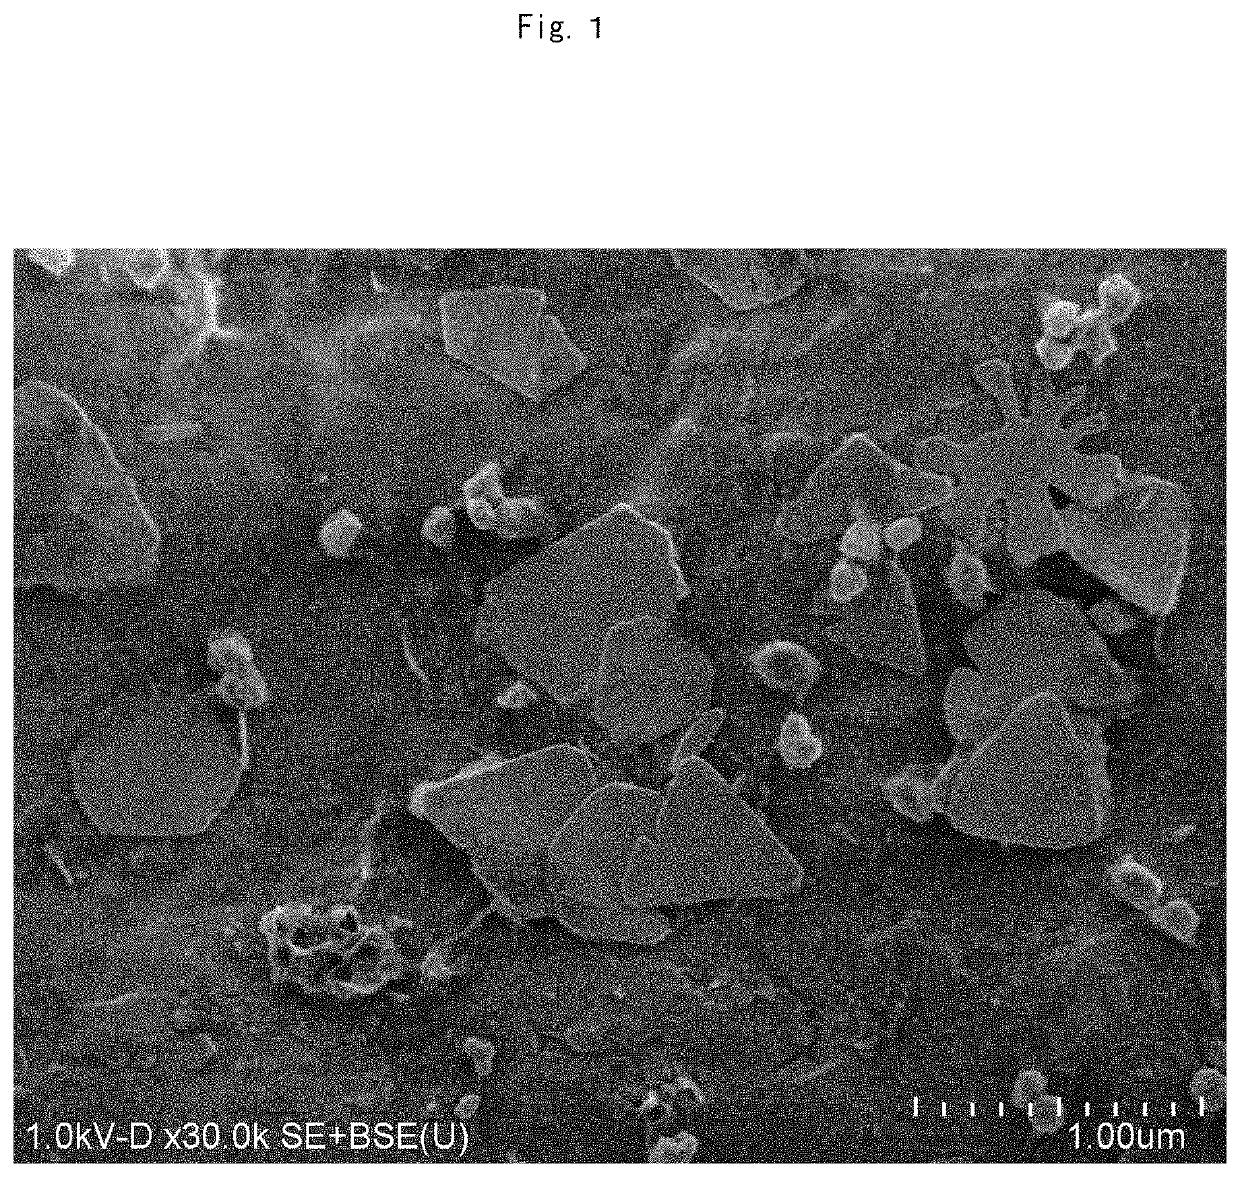 Structure containing metal microparticles